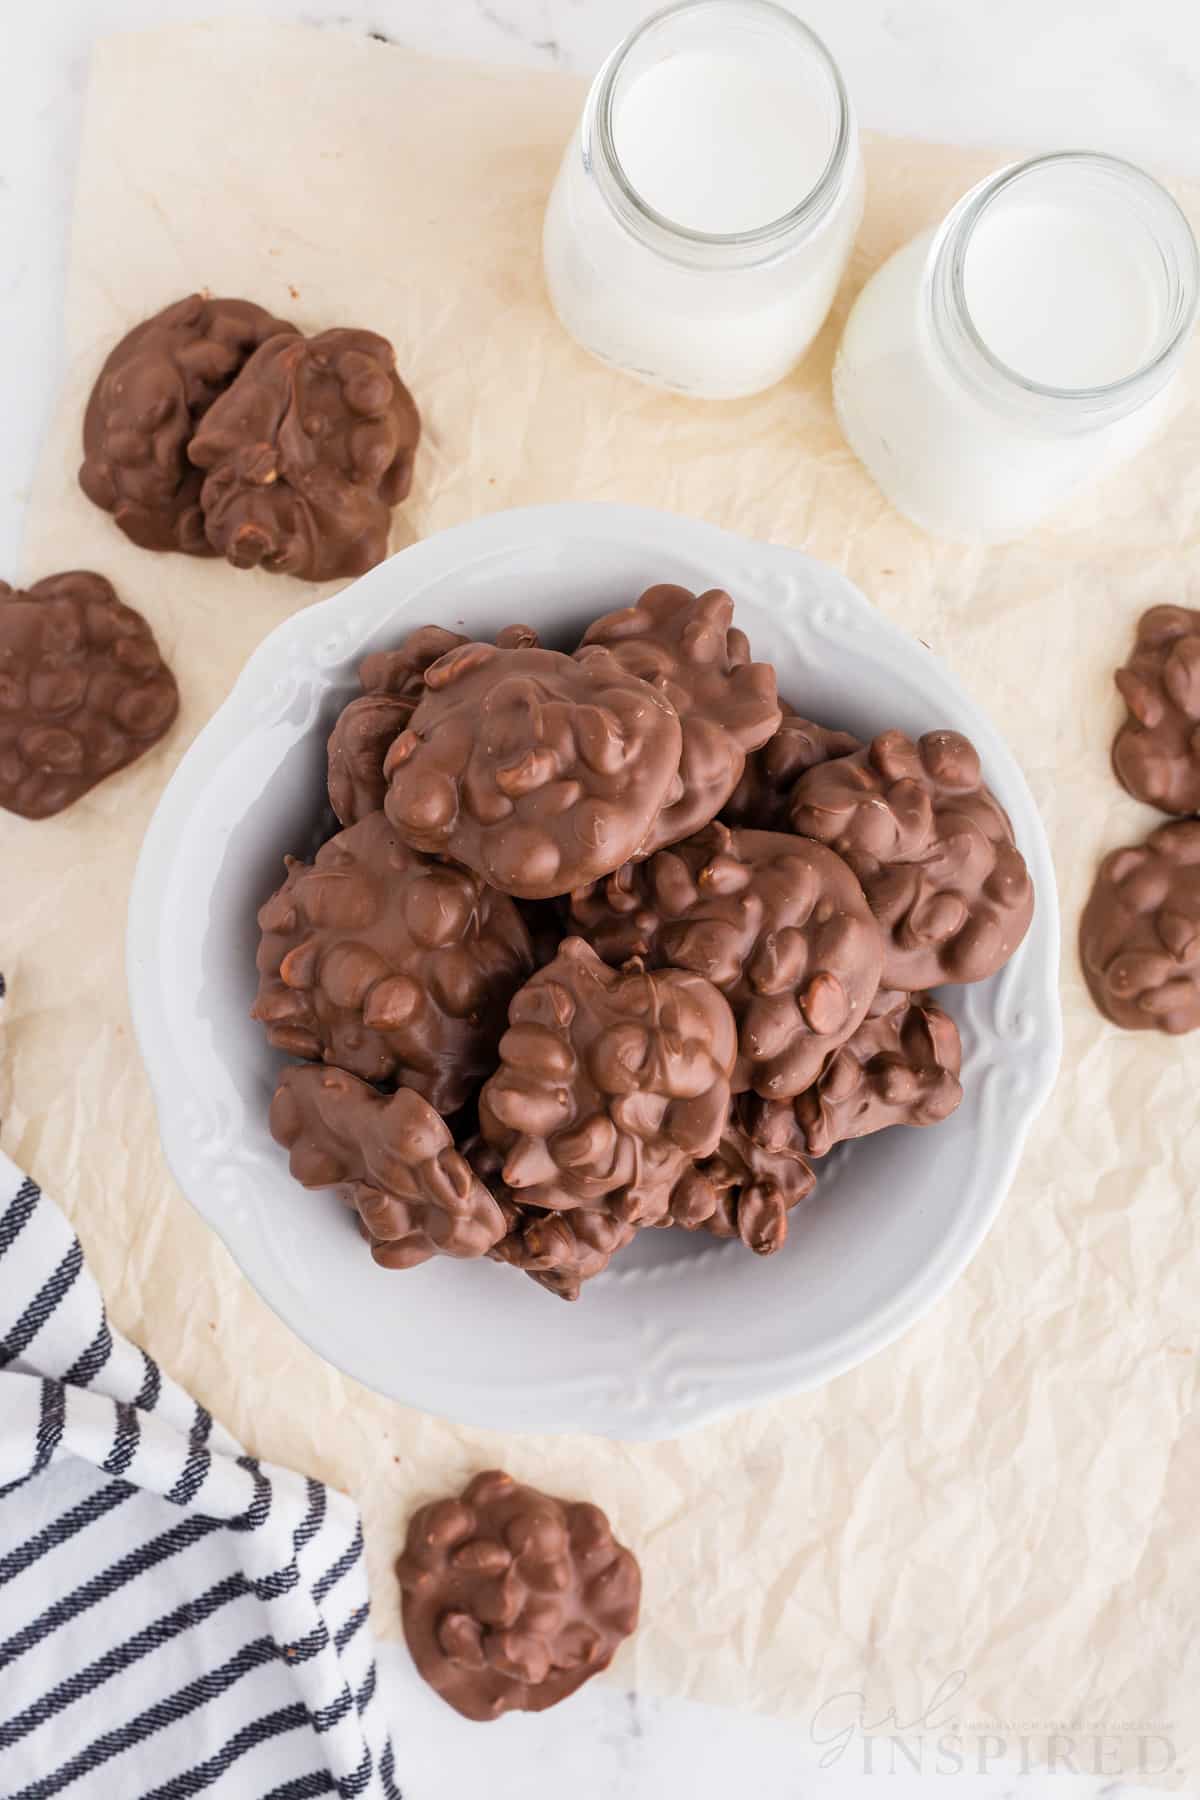 Overhead view of chocolate peanut clusters on a white cake stand, chocolate peanut clusters on a sheet of wax paper, two jars of milk, striped linen, on a marble countertop.